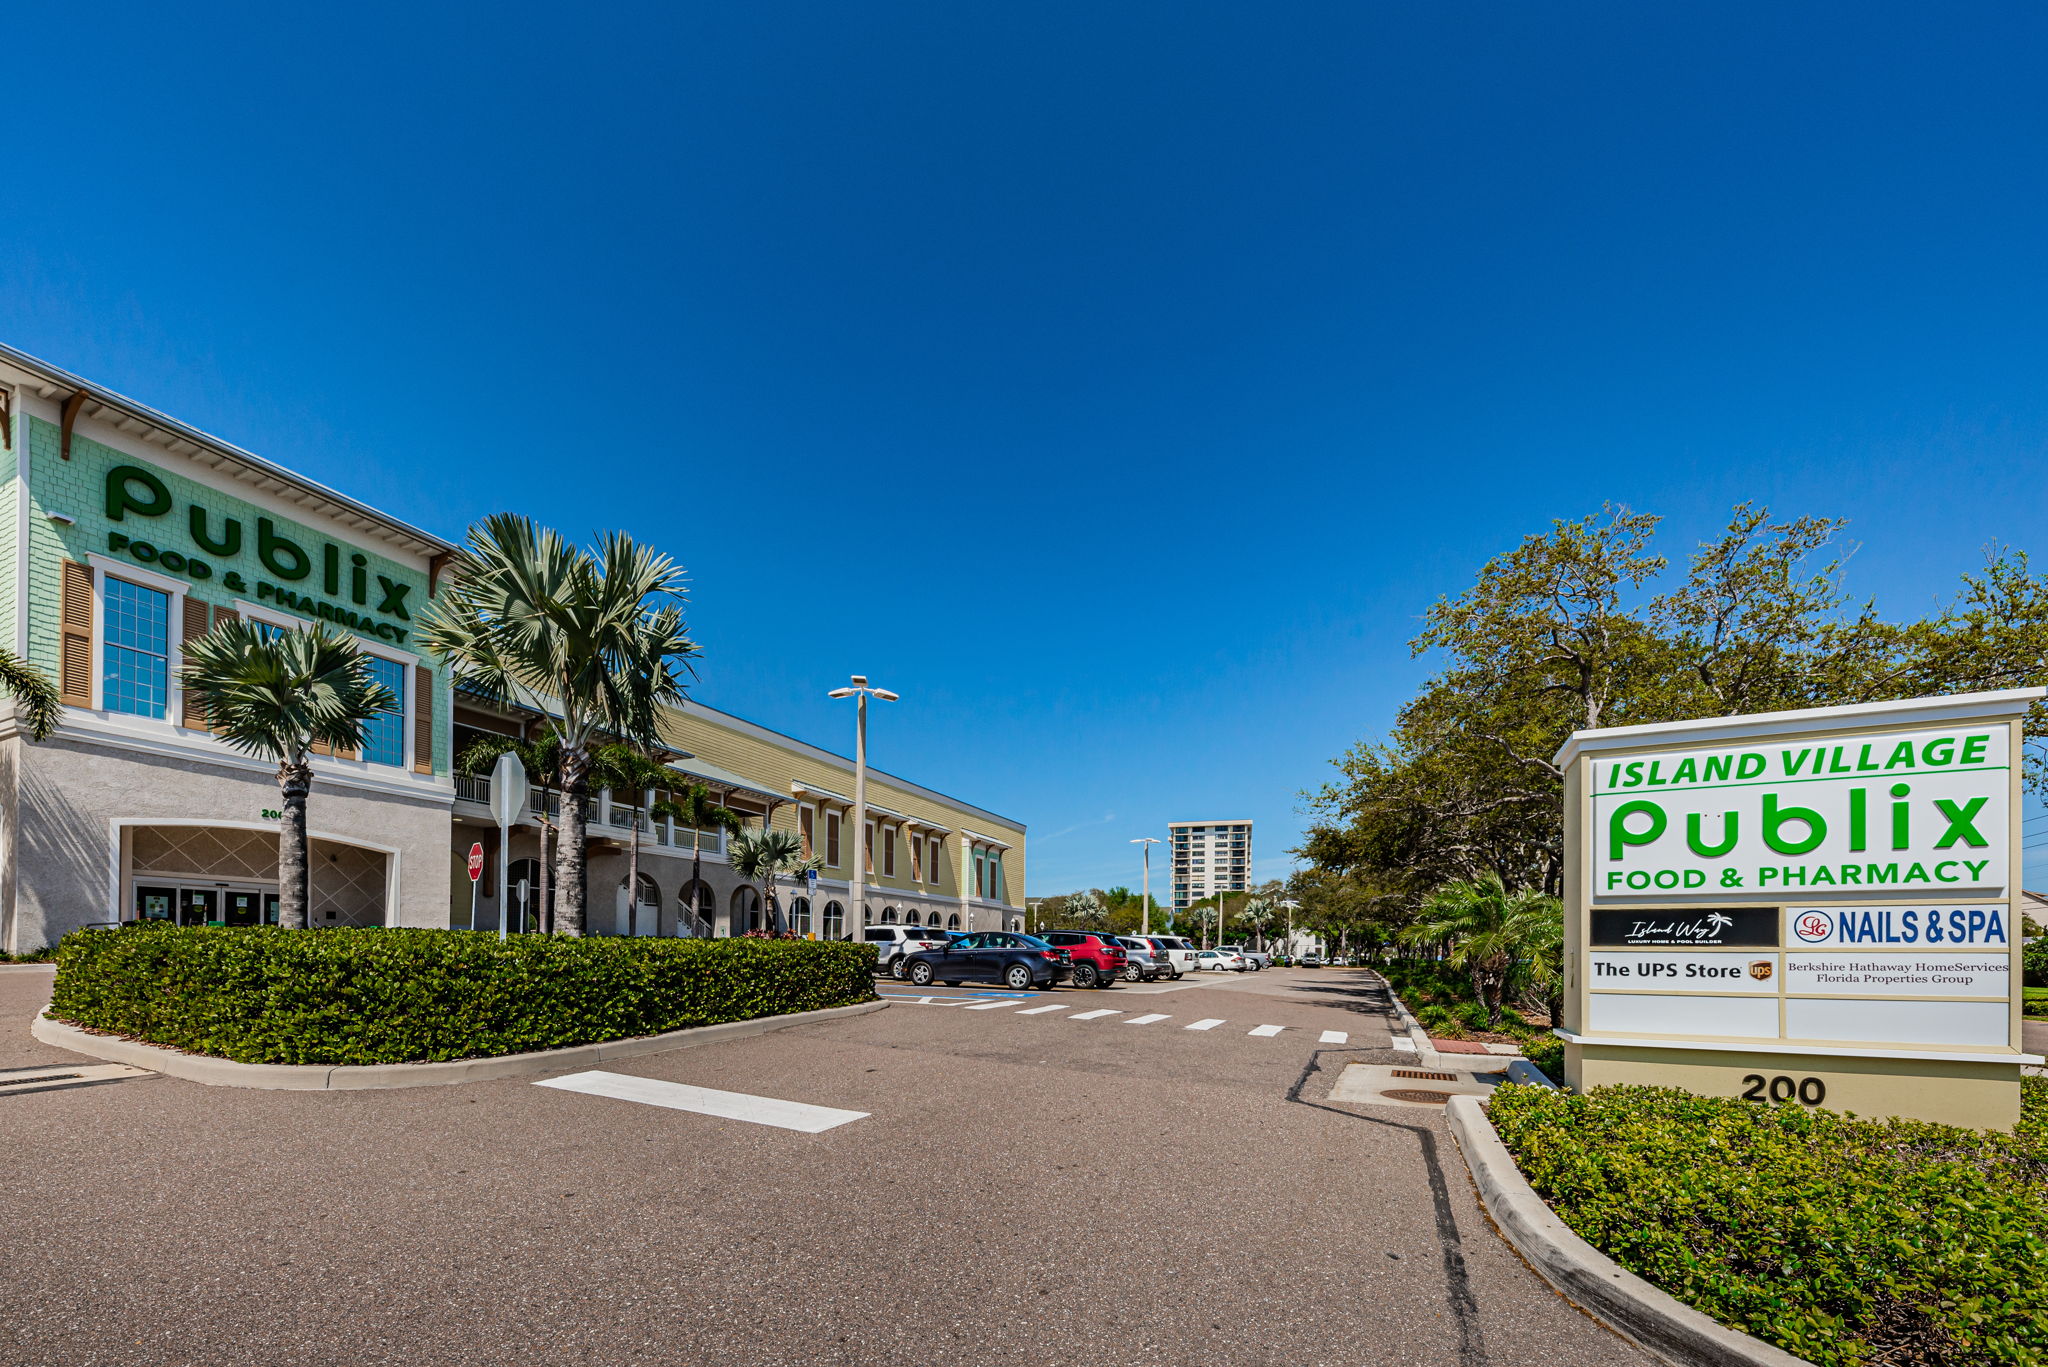 10-Publix Shopping Nearby